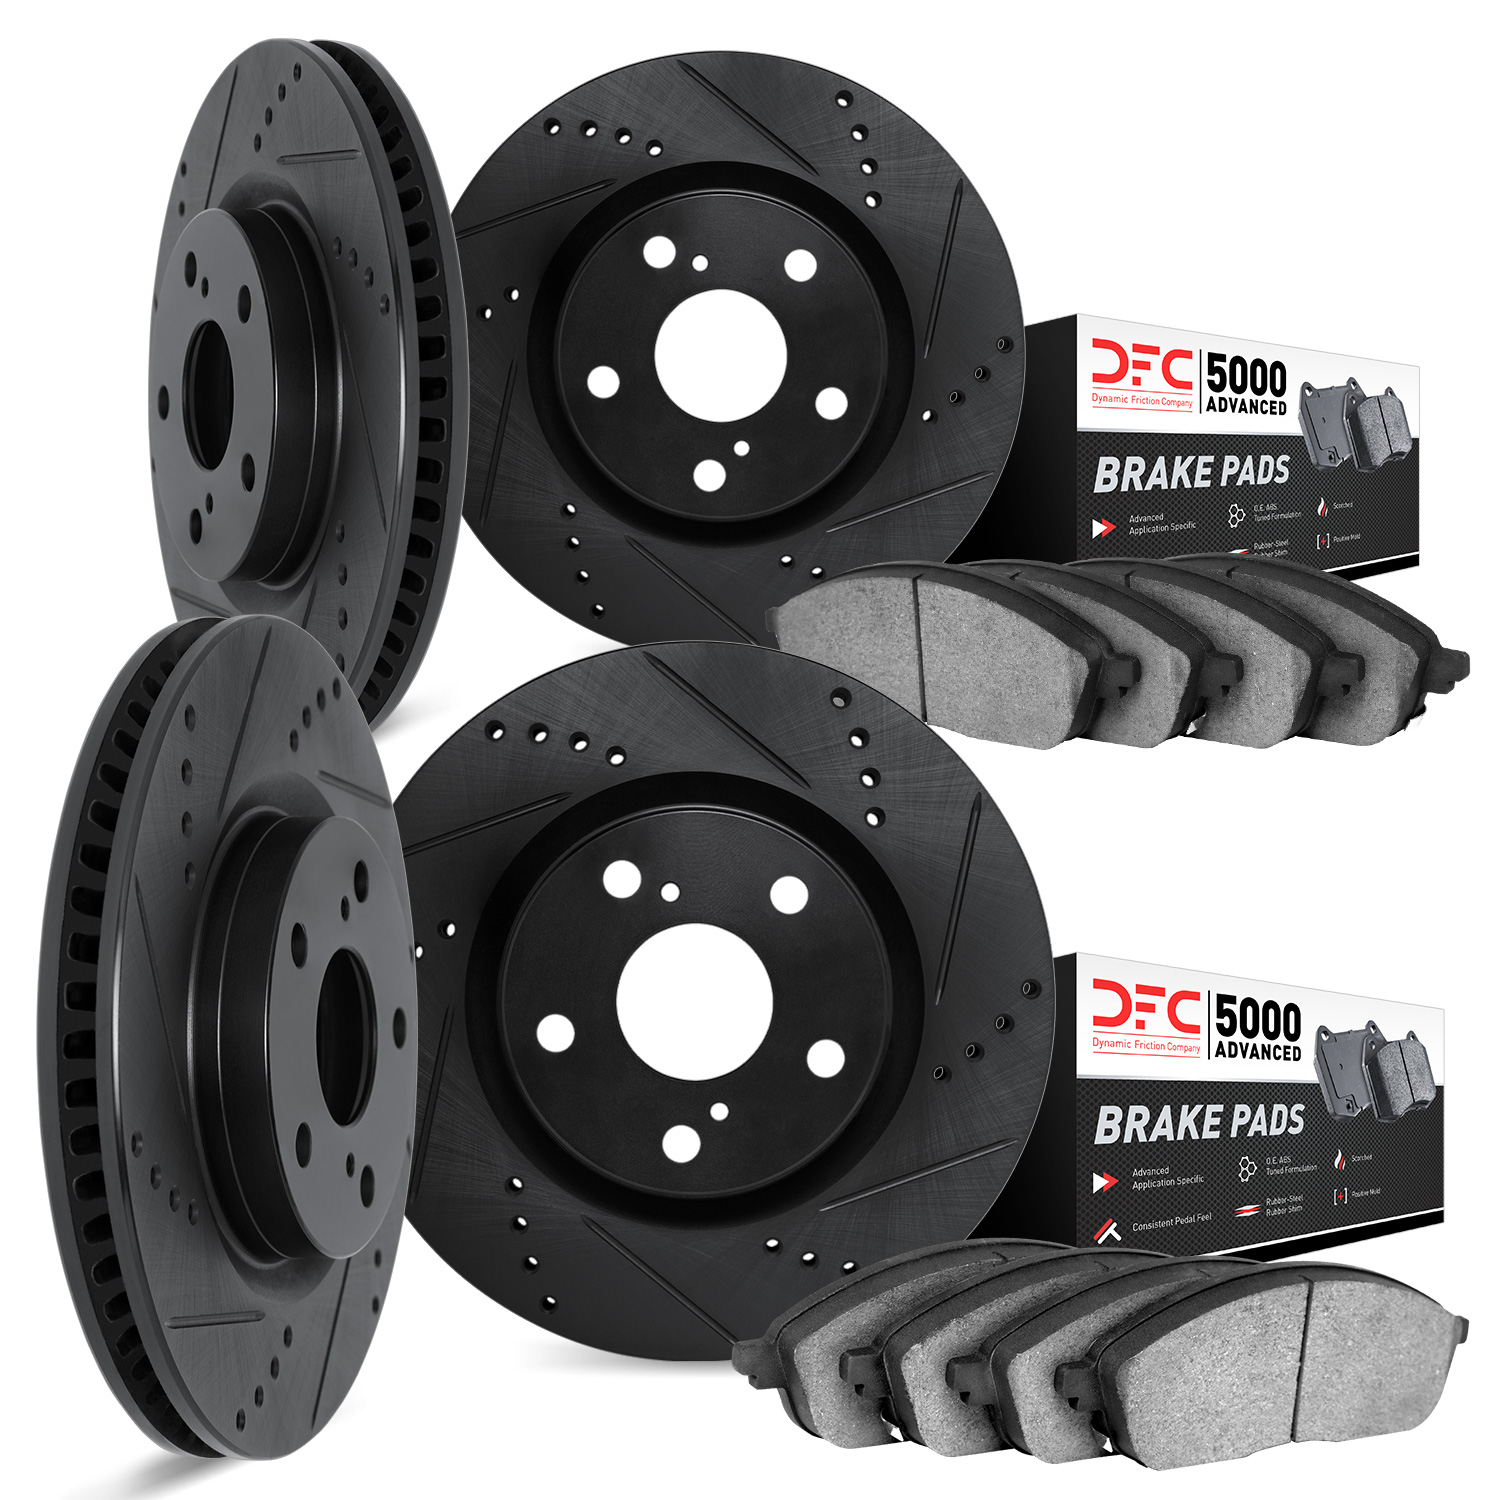 8504-11010 Drilled/Slotted Brake Rotors w/5000 Advanced Brake Pads Kit [Black], 2017-2017 Land Rover, Position: Front and Rear